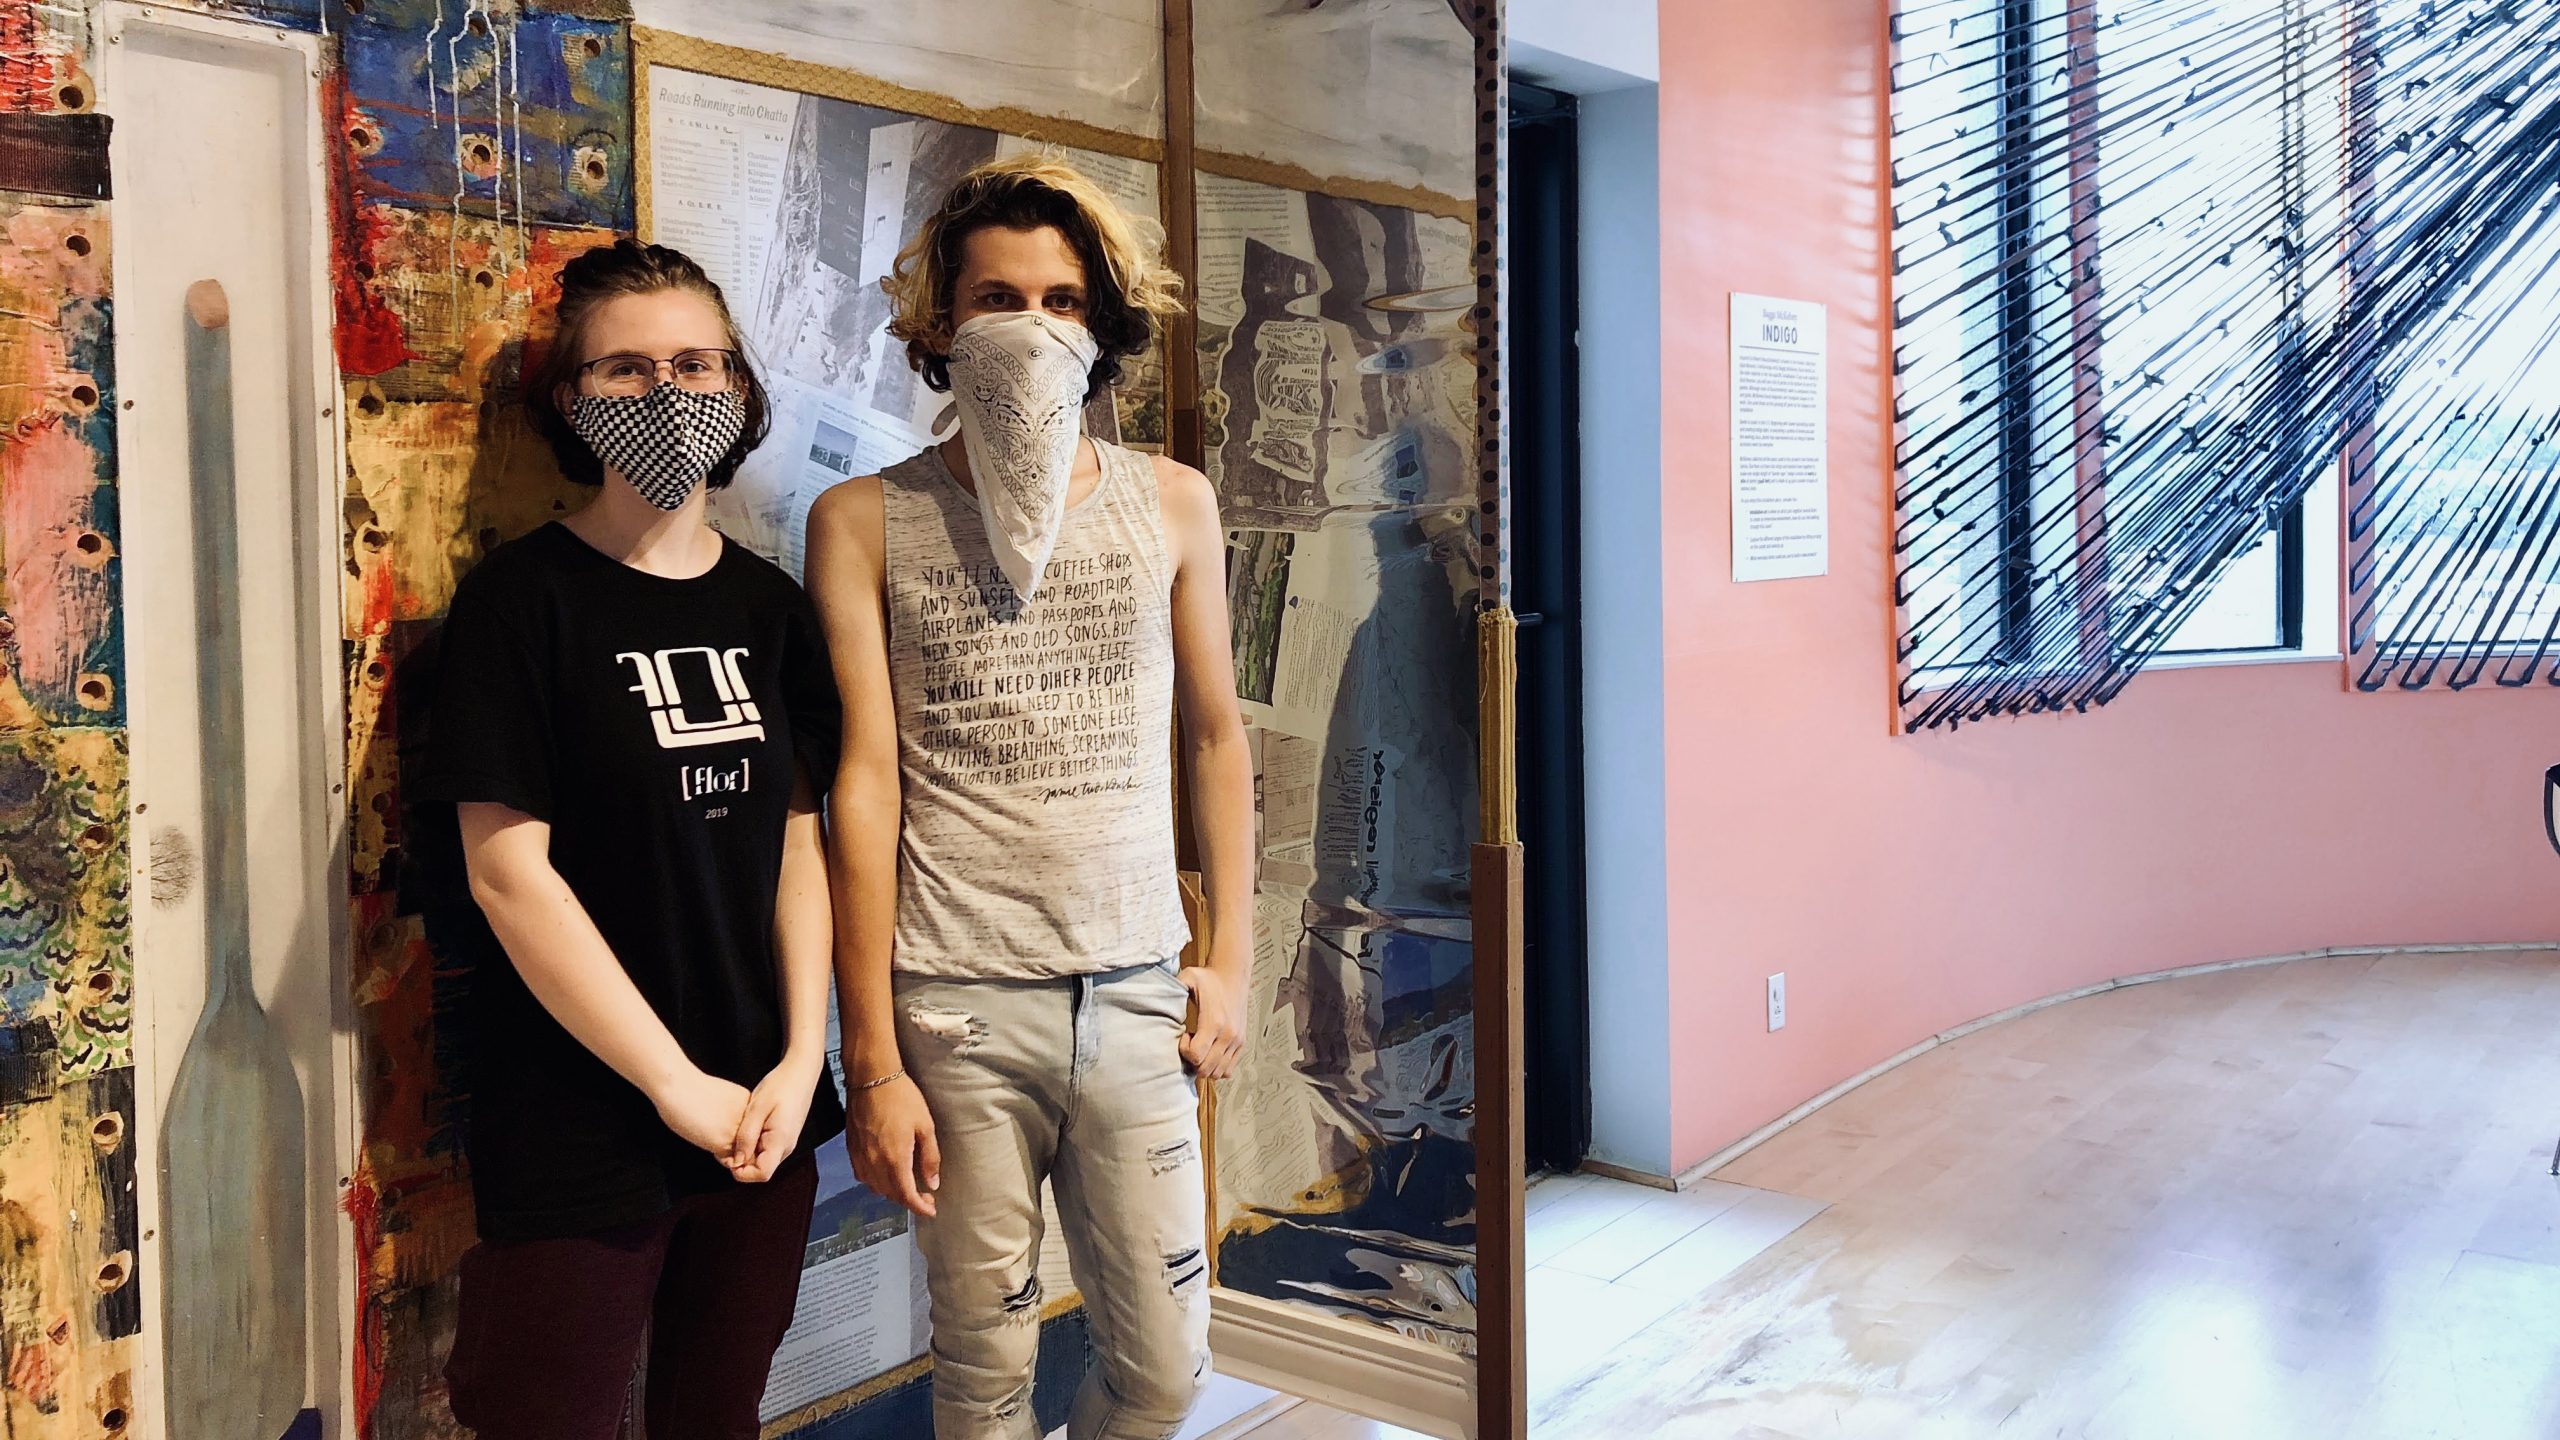 Two teens stand in front of colorful collage on the wall. They are wearing face masks.